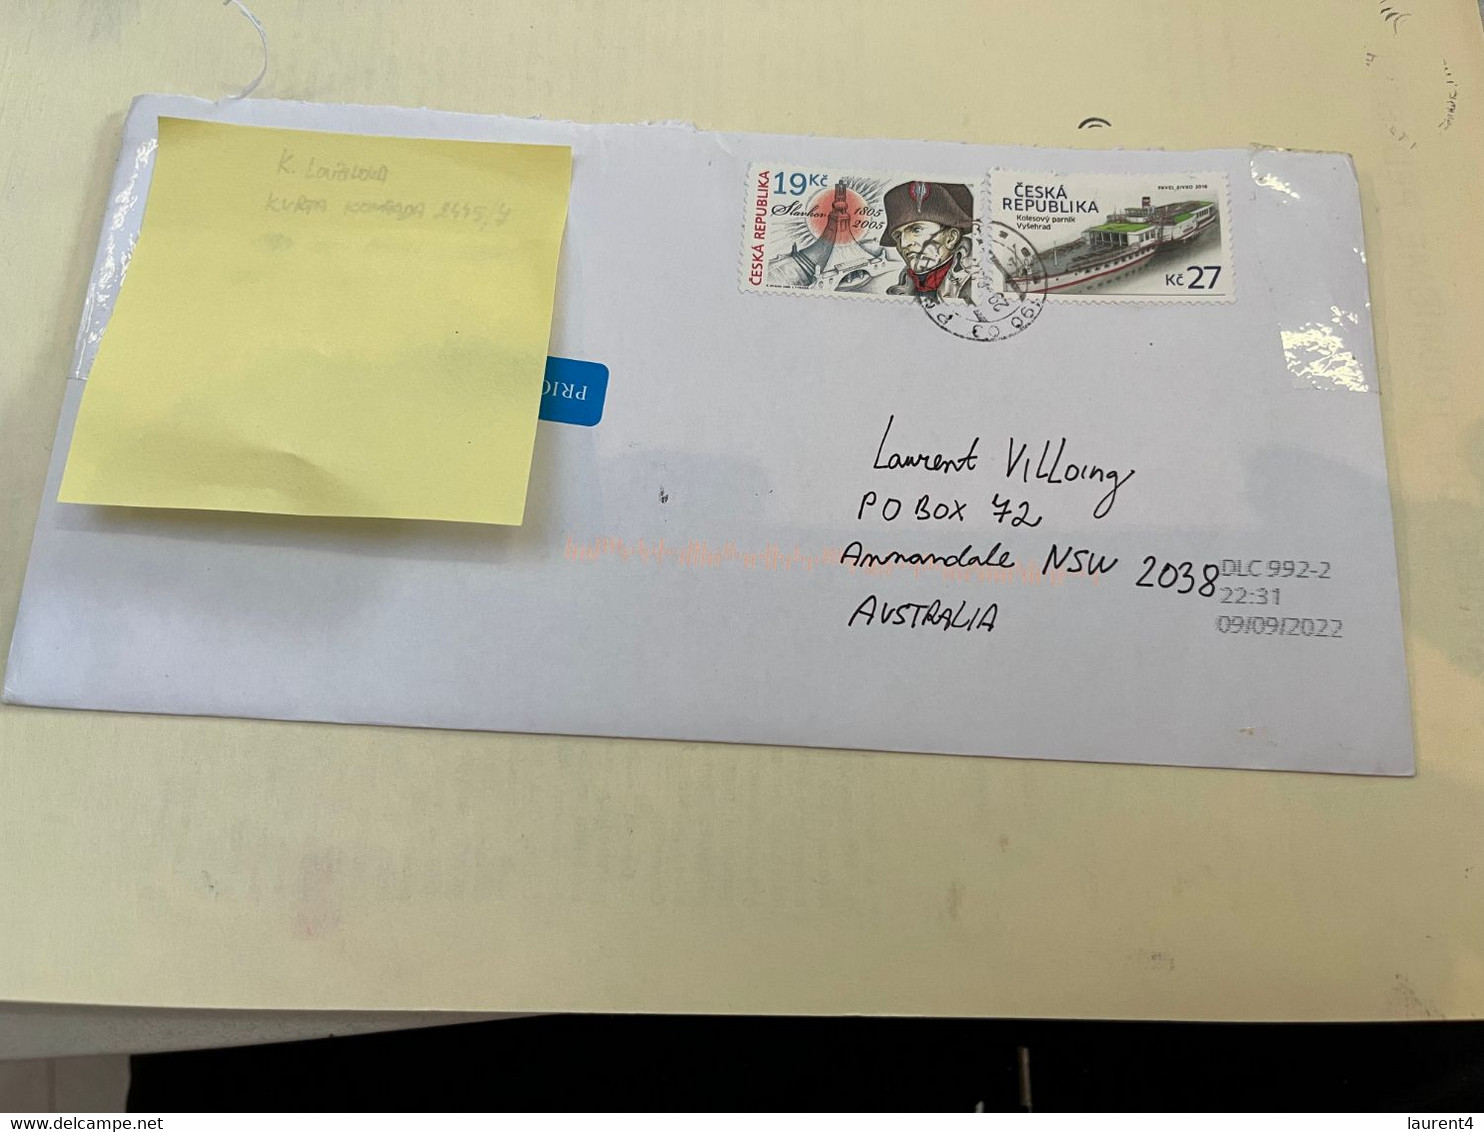 (1 L 7) Letter Posted From Czech Republic To Australia (during COVID-19 Pandemic Crisis) Napoléon & Ship Stamps - Covers & Documents